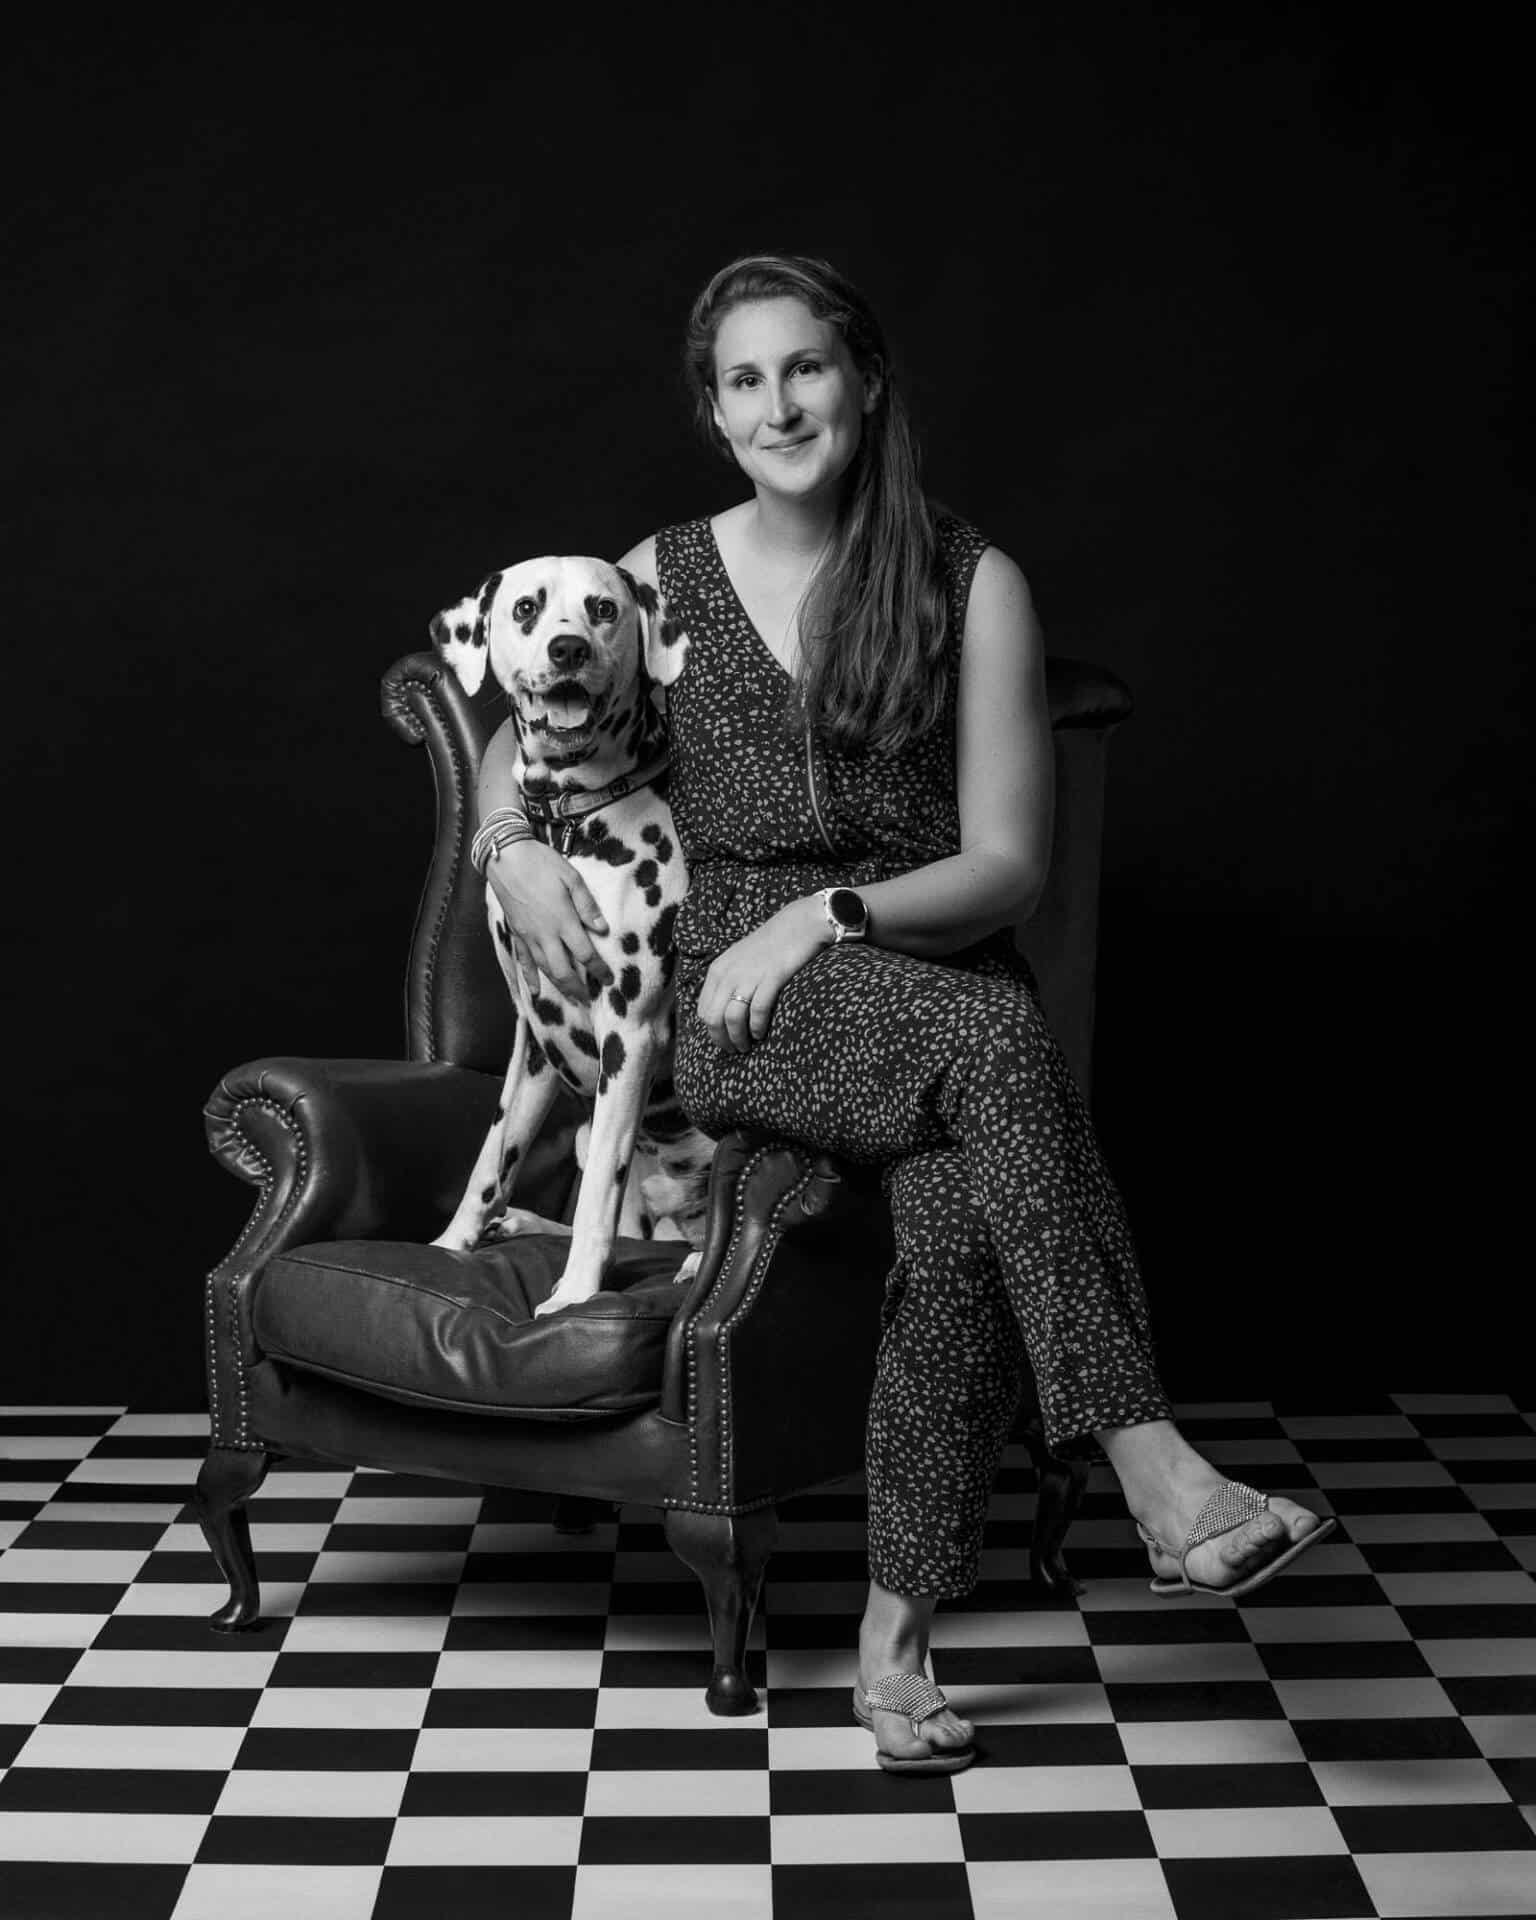 Dalmatian Dog and Owner Studio Portrait by Mark Hewitson of Mark Hewitson Photography, Thame, Oxfordshire